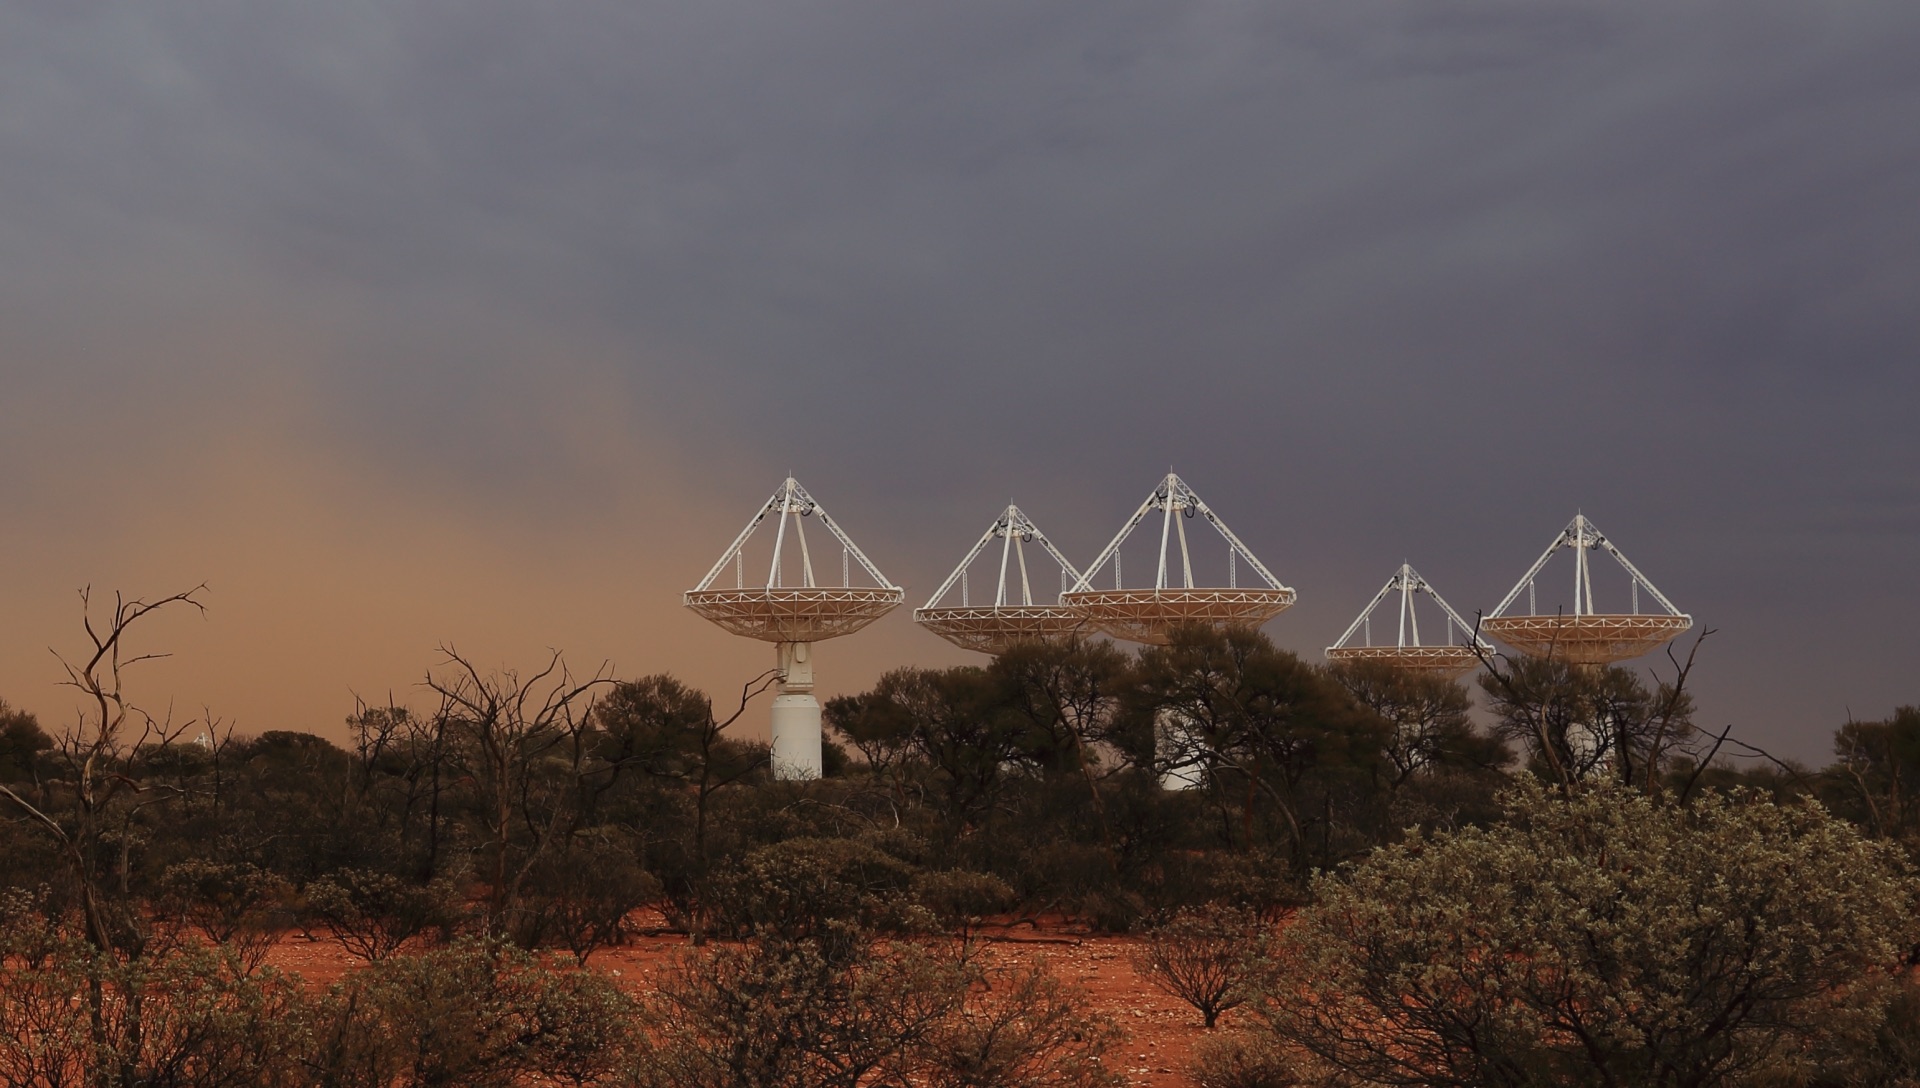 An image of five ASKAP antennas with dark skies in the background